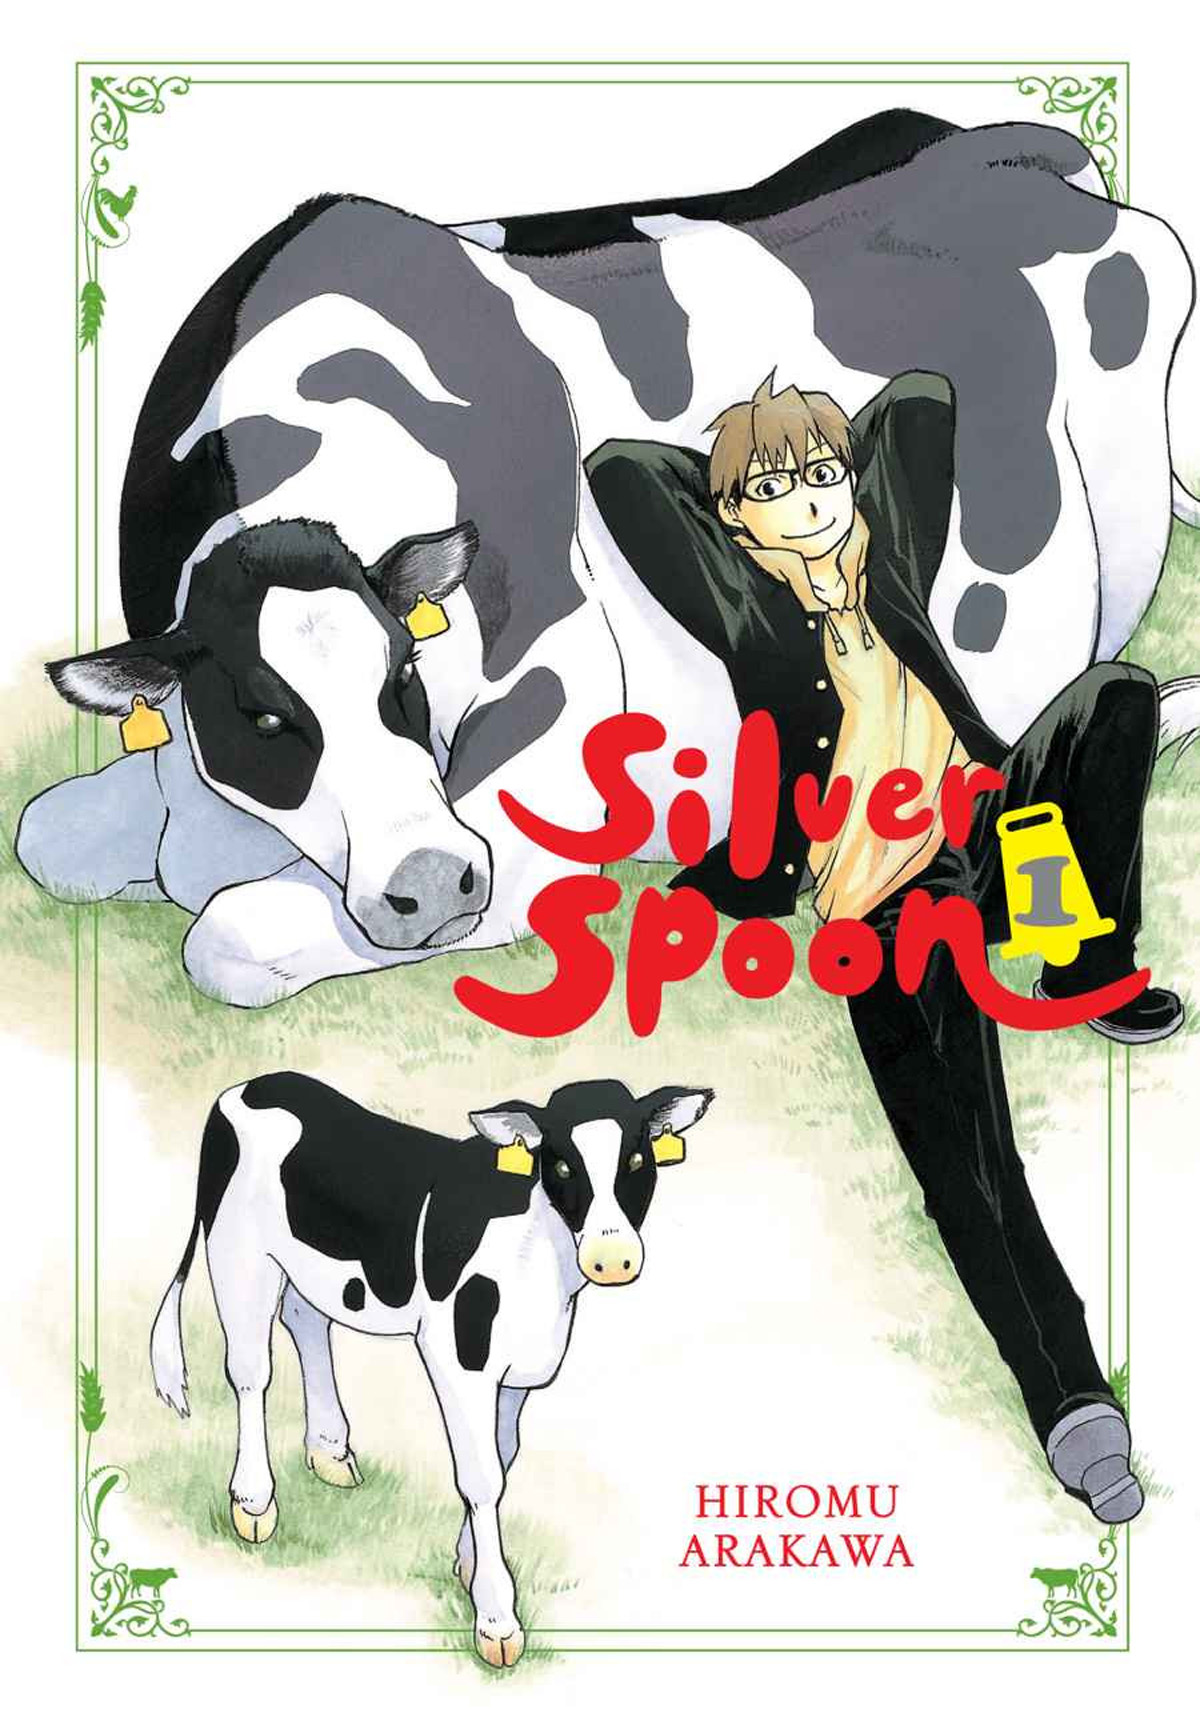 Couverture du manga Silver Spoon tome 1. 